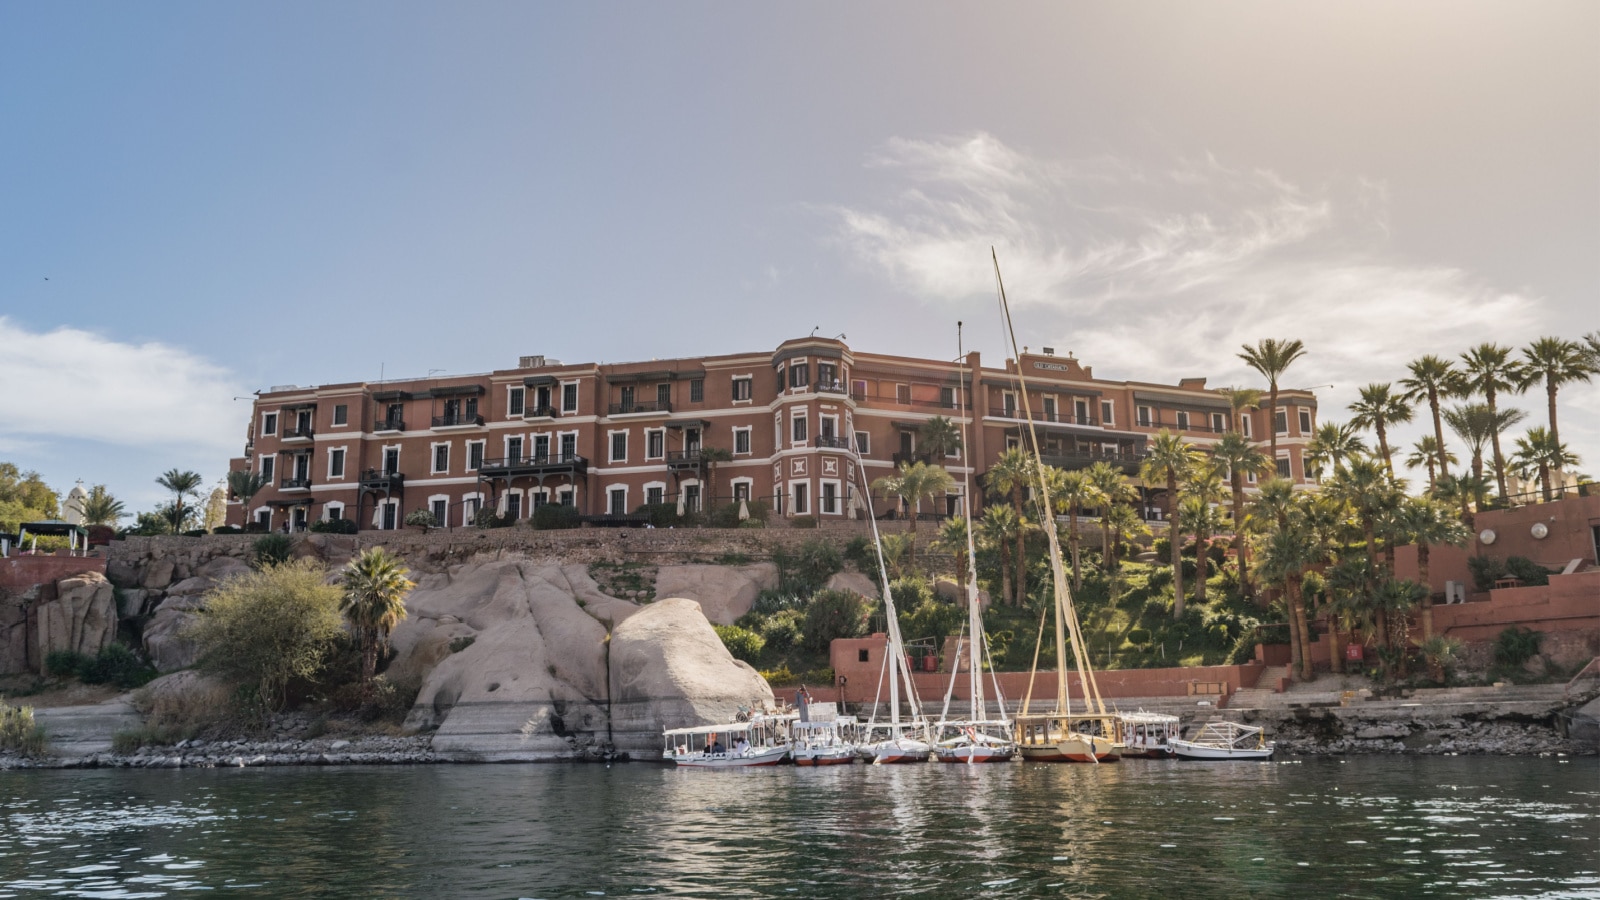 Aswan/Egypt - 01/23/2018: The Sofitel Legend Old Cataract Hotel is a historic British colonial-era 5-star luxury resort hotel located on the banks of the River Nile in Aswan, Egypt.